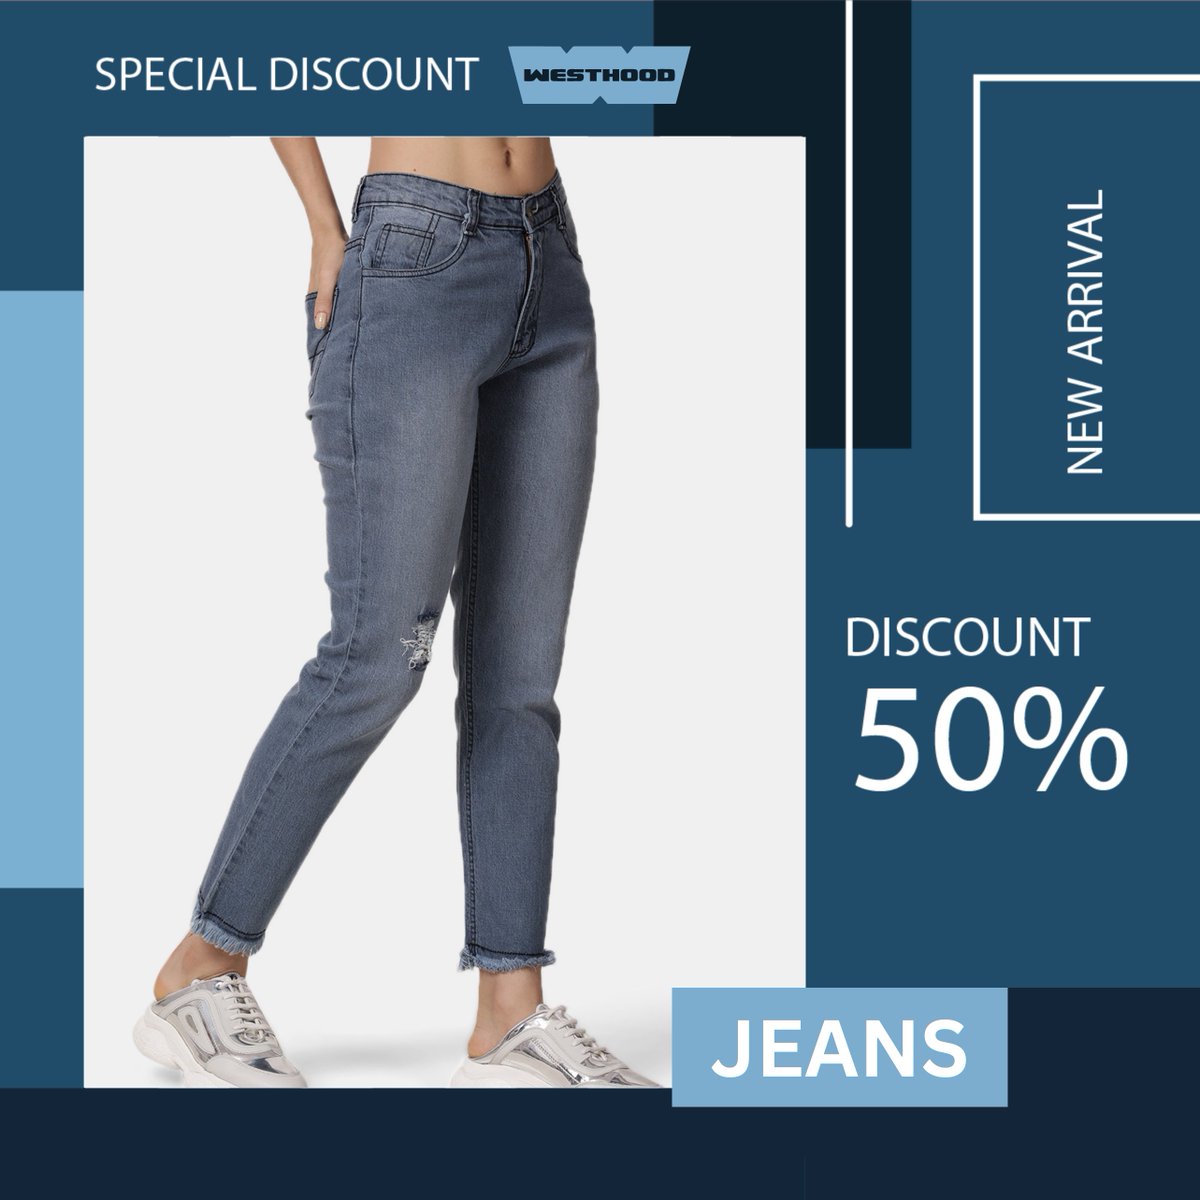 Women Fit Fade Stretchable Jeans
#FitFadeStretchableJeans #WomenFashion #StretchDenim #JeansLovers #FashionableWomen #InstaStyle #DenimObsession #TrendyThreads #ComfyChic #CasualElegance #Westhood